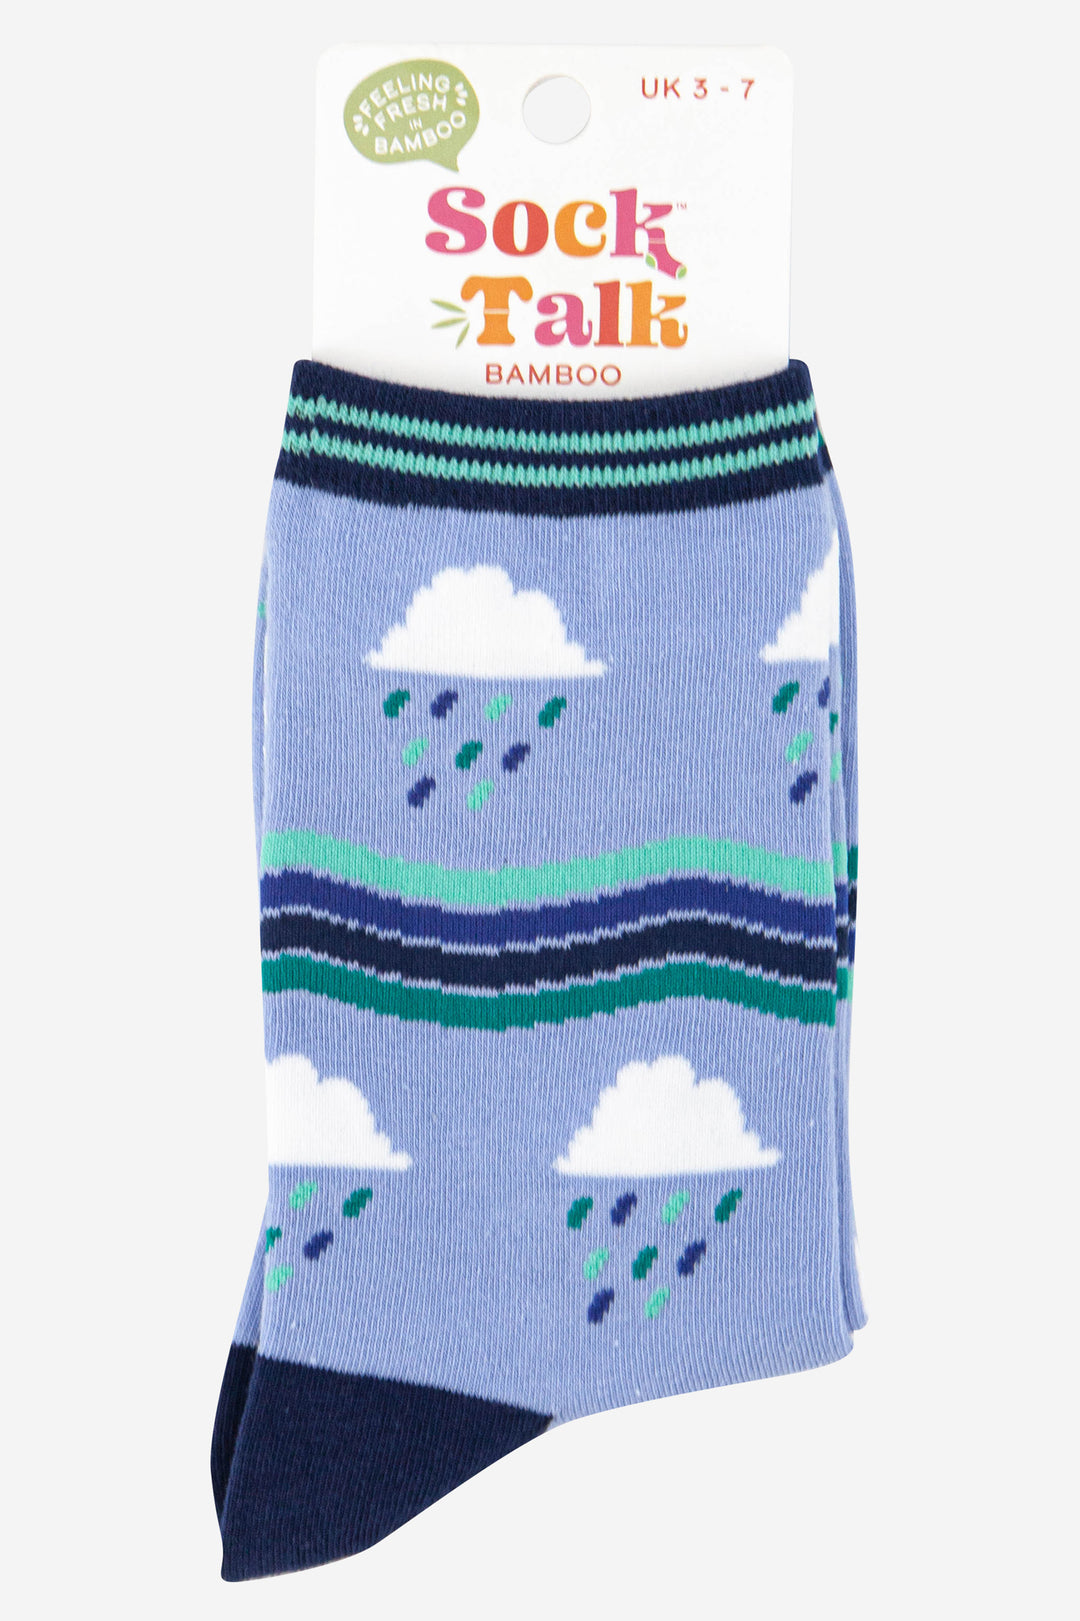 light blue socks with a pattern of white rain clouds and blue ombre wavy stripes uk size 3-7